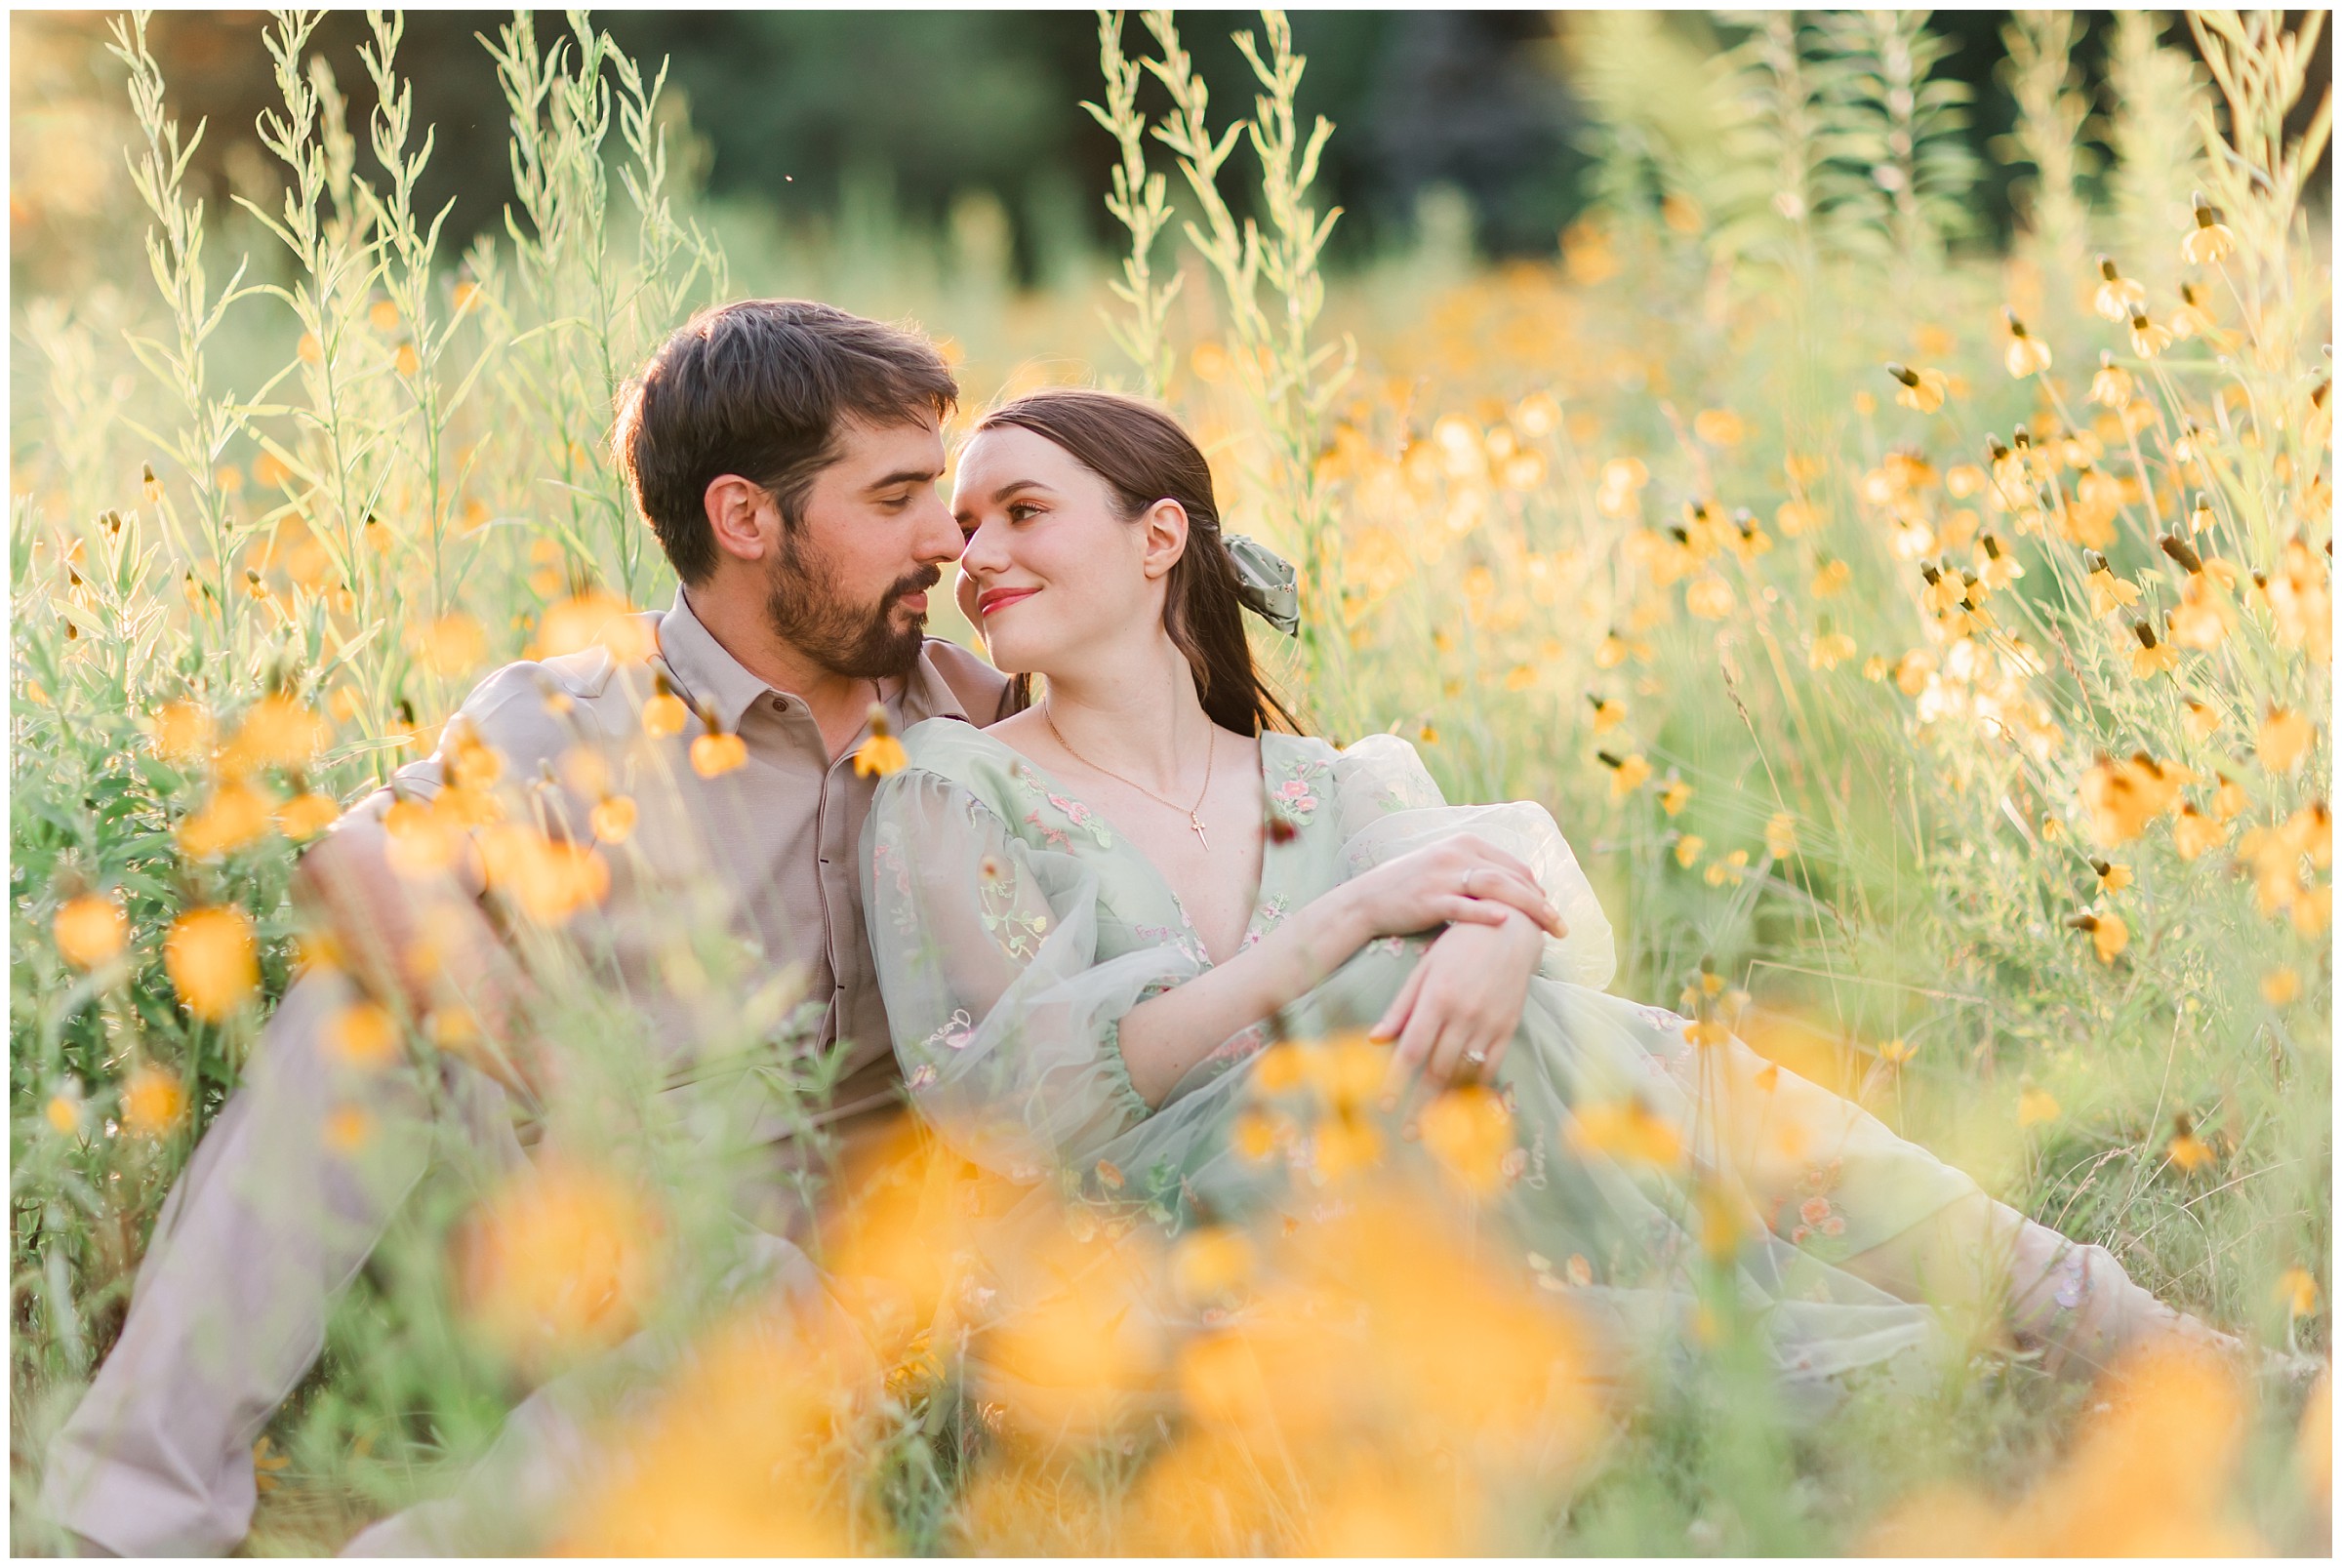 Man and woman sitting in a field of yellow wildflowers